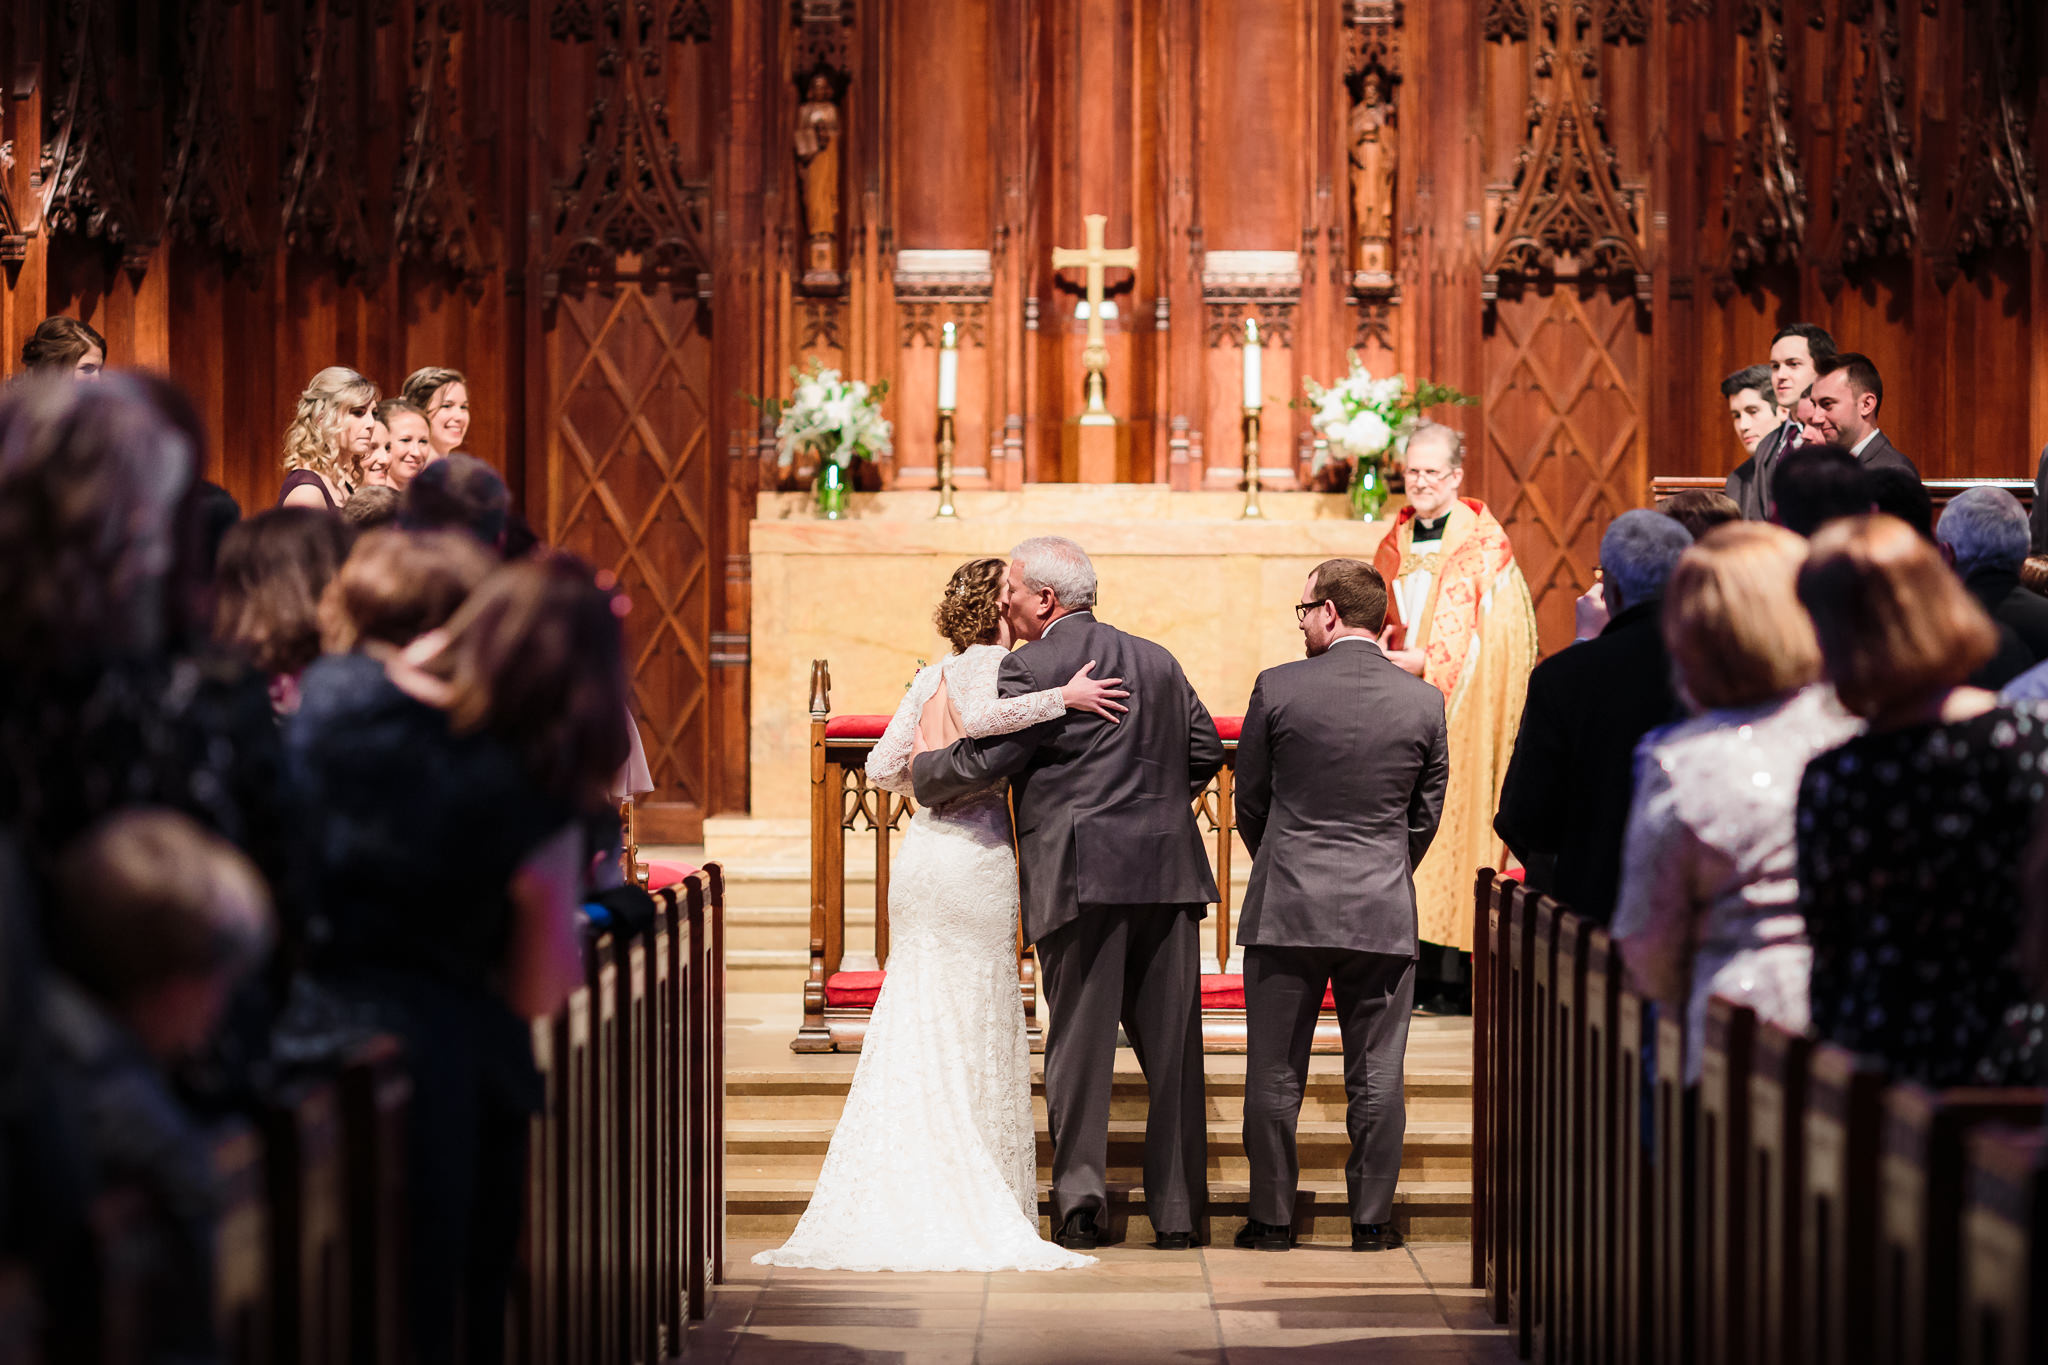 Father of the bride kisses her cheek as he gives her away at a Heinz Chapel wedding